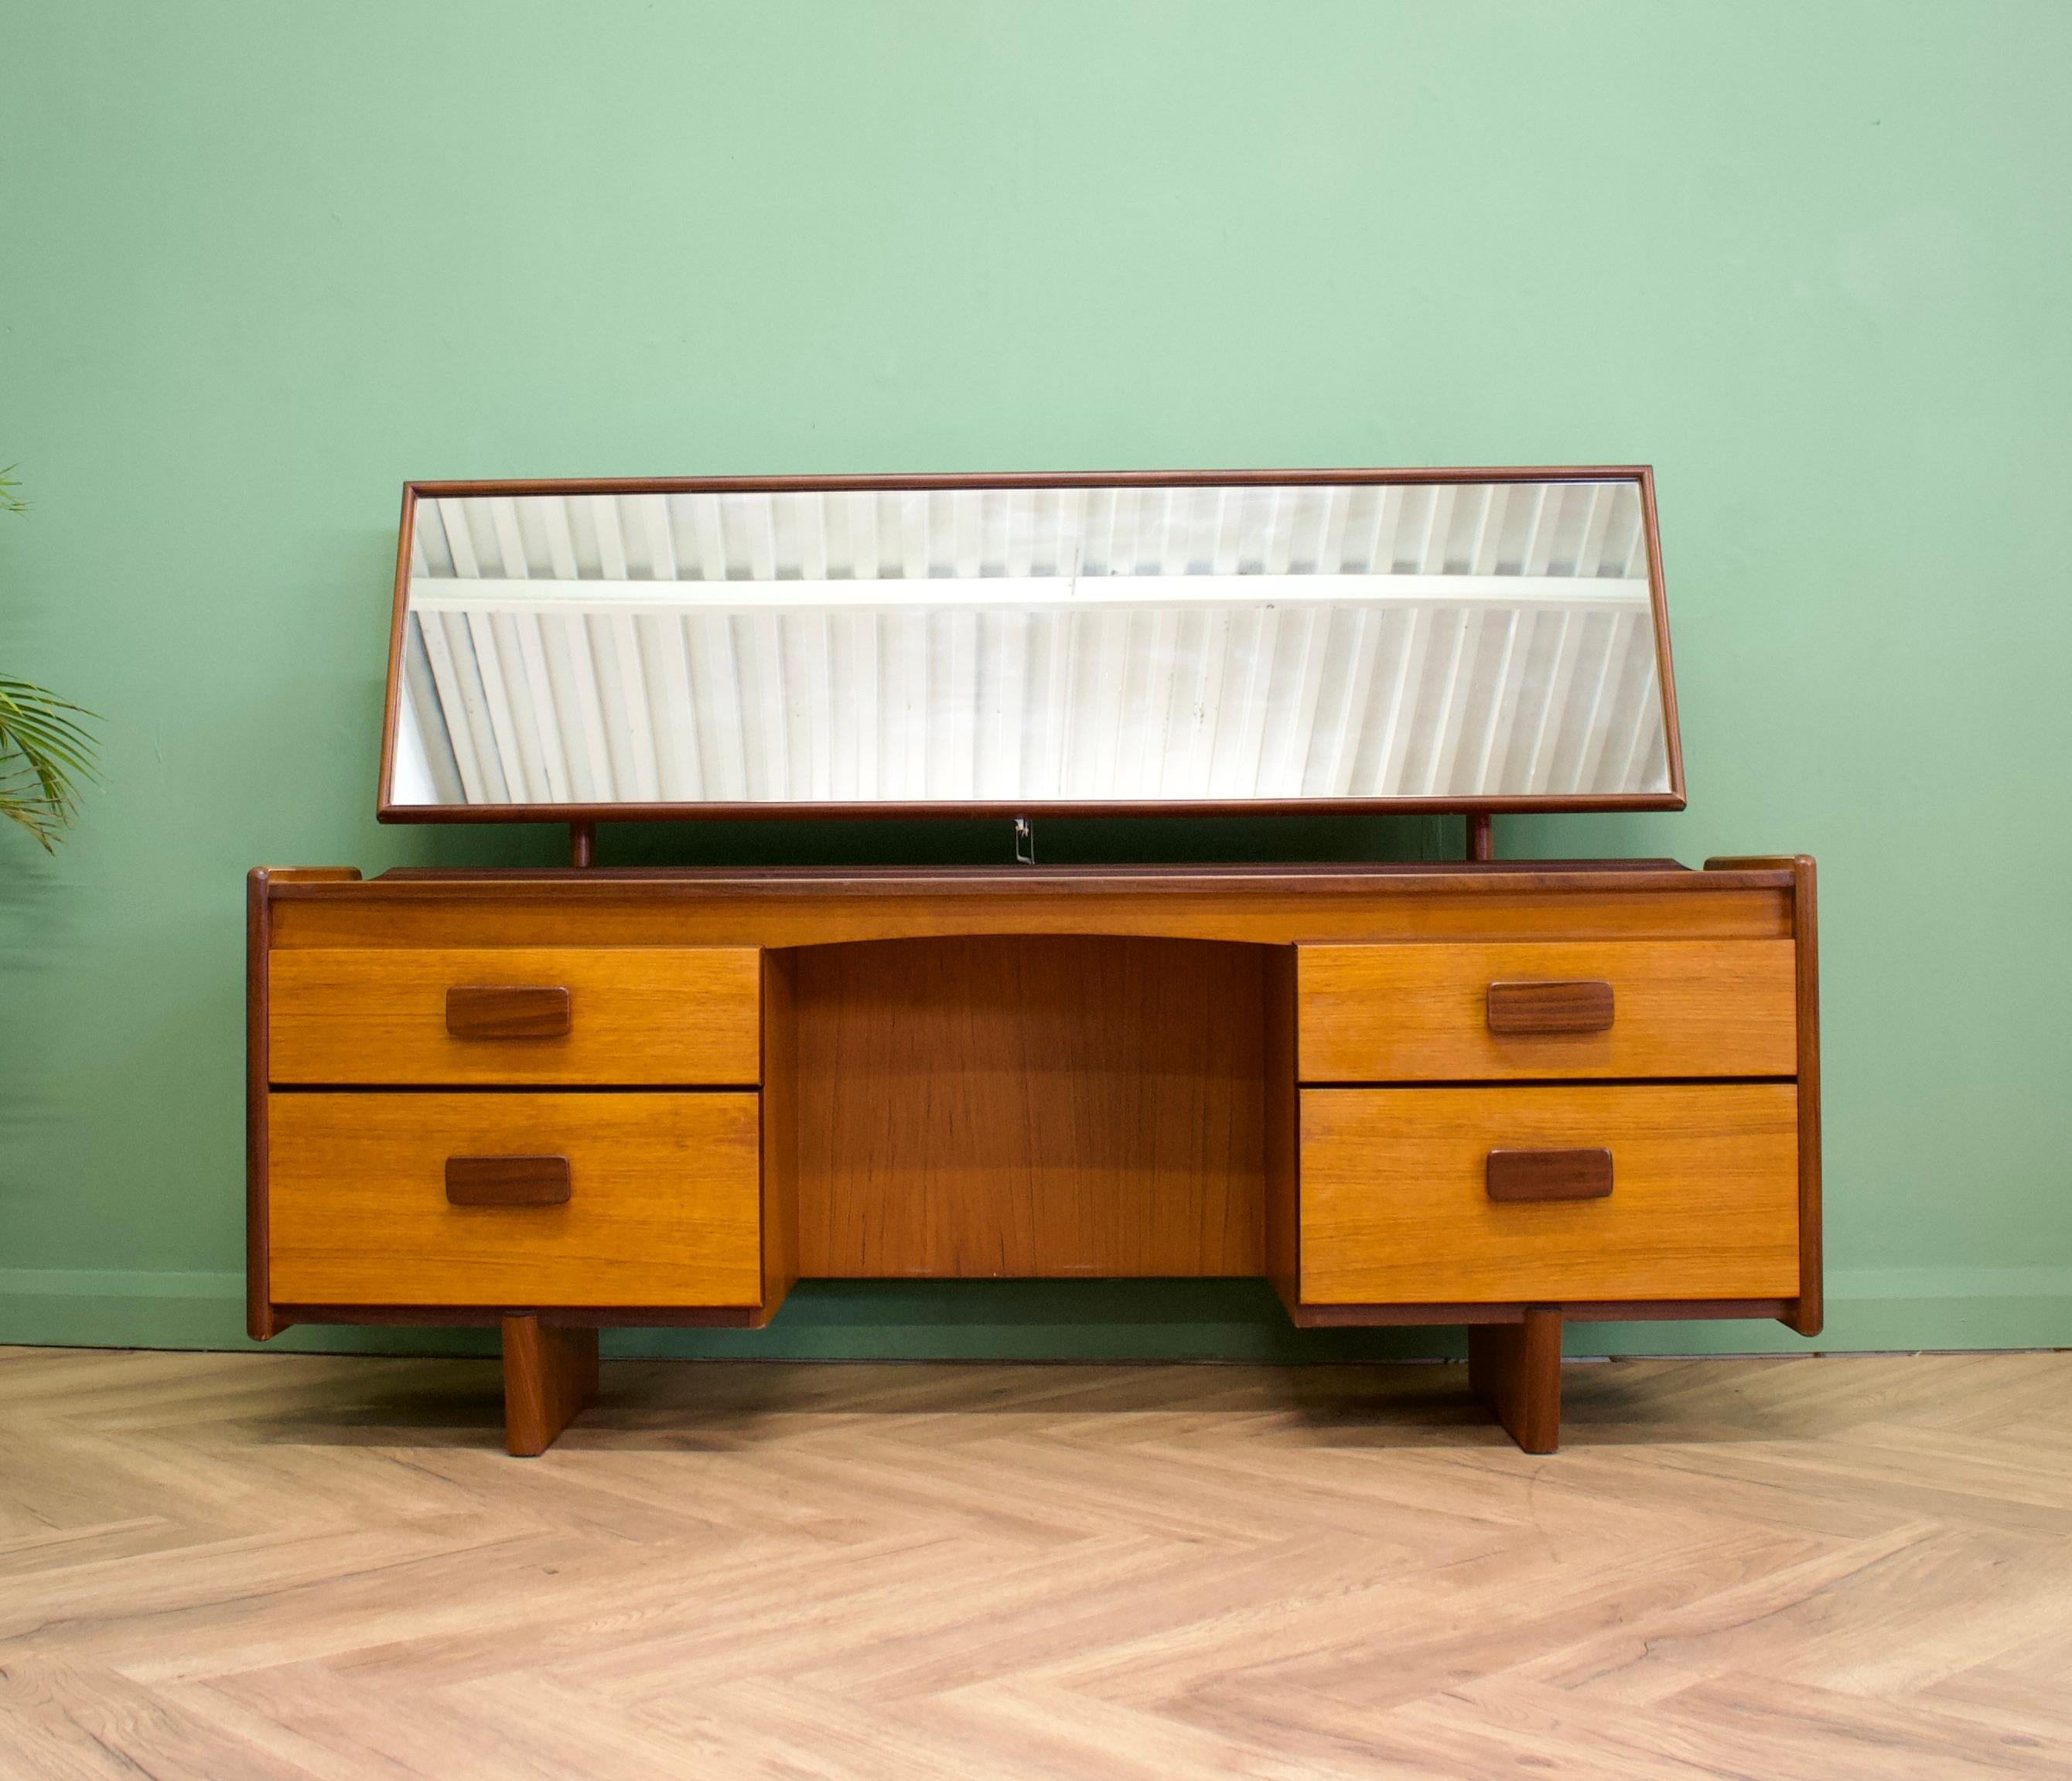 - Mid century dressing table.
- Made in the UK by White and Newton
- Featuring four drawers and mirror.

.